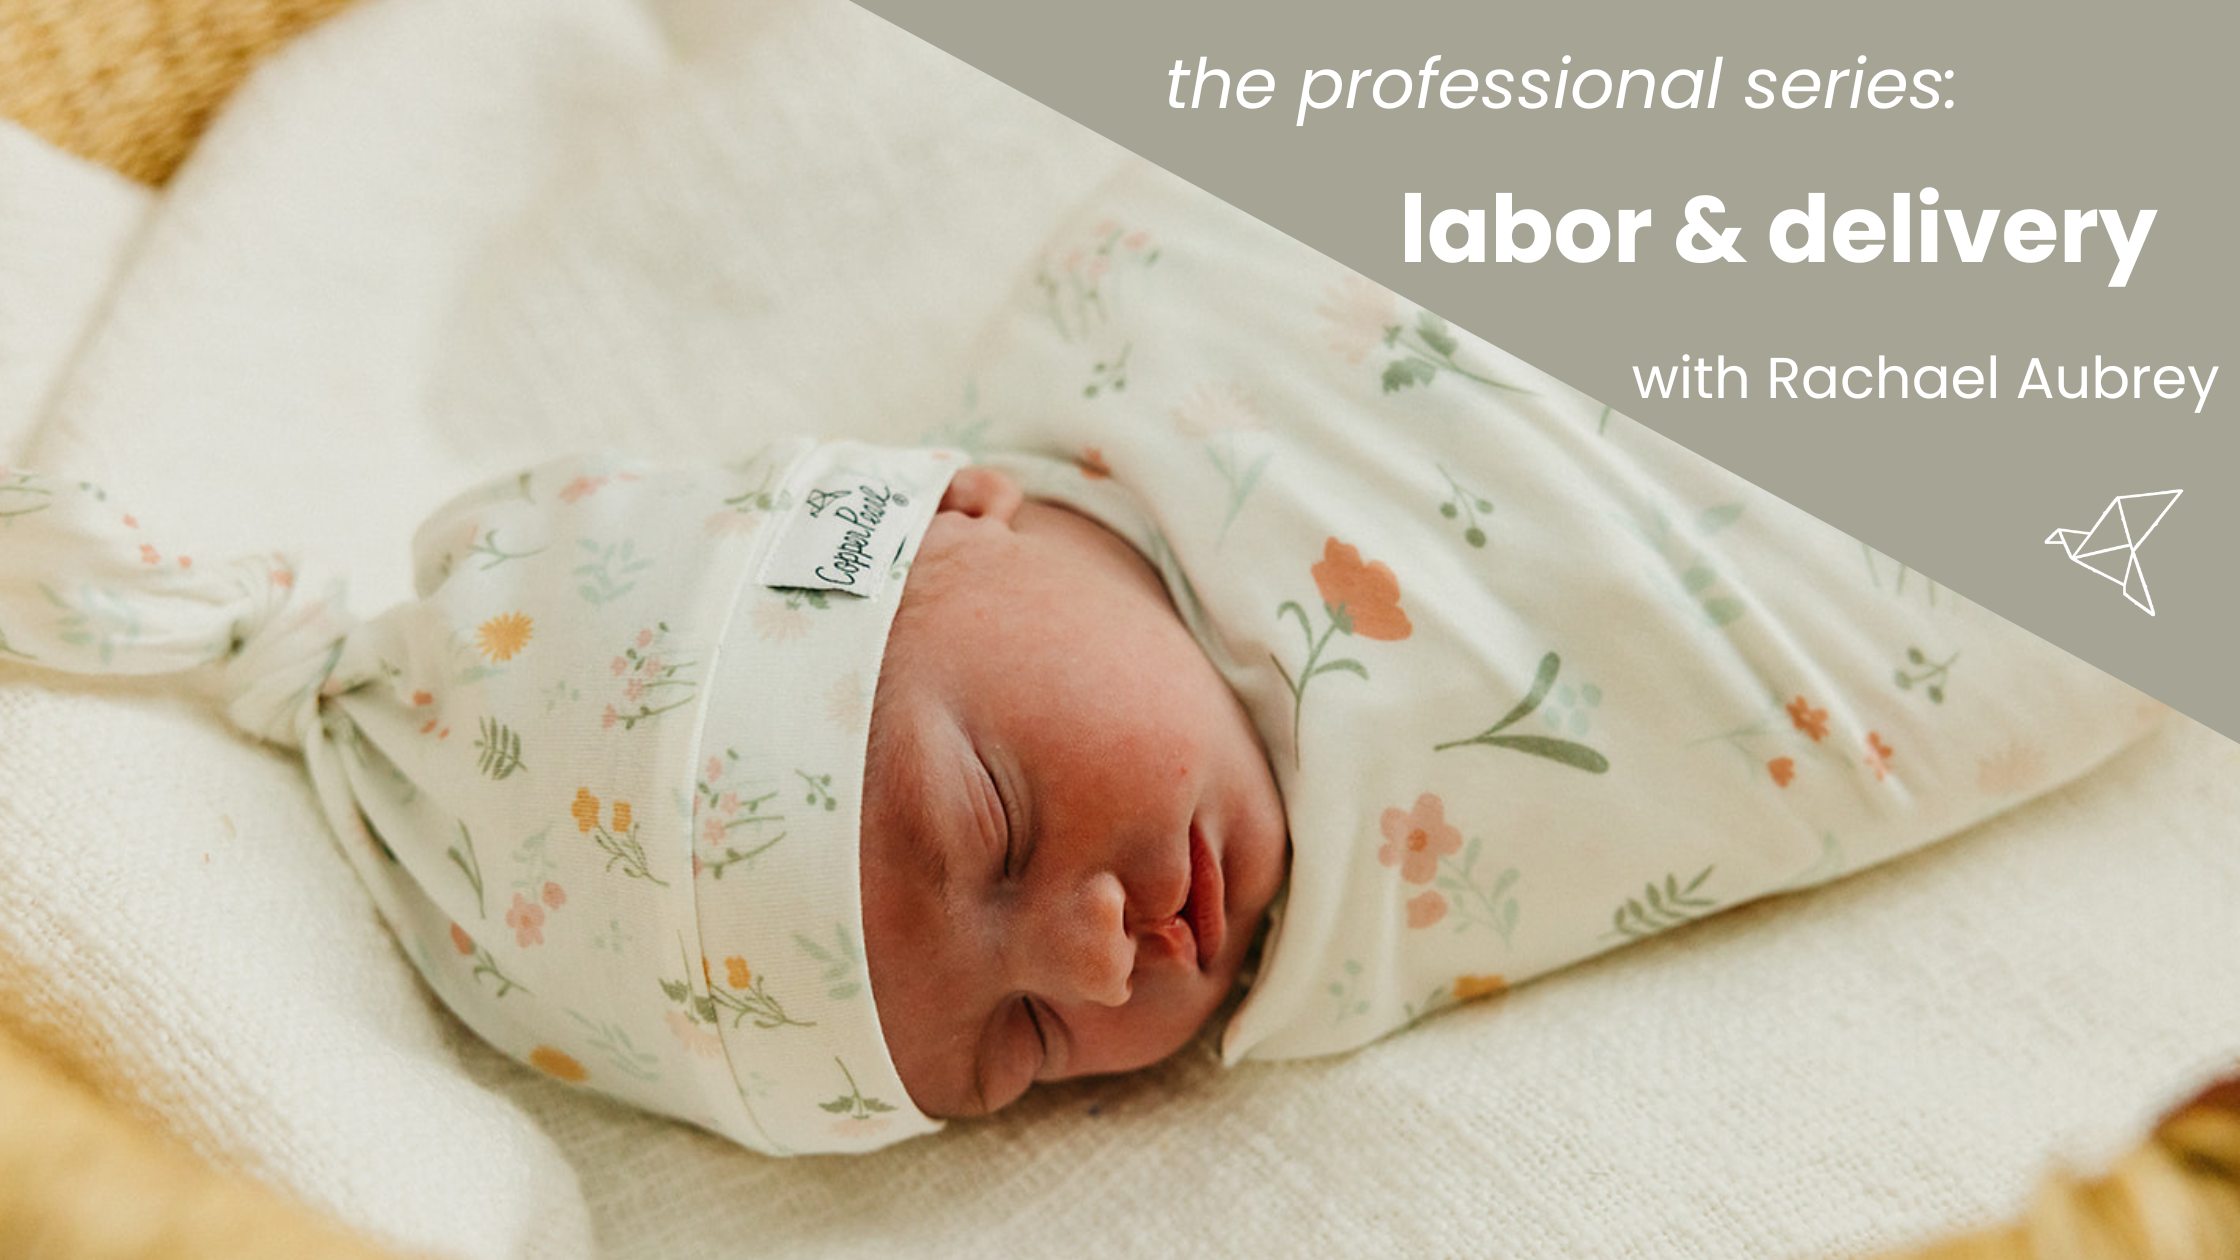 Professional Series: Labor & Delivery with Rachael Aubrey